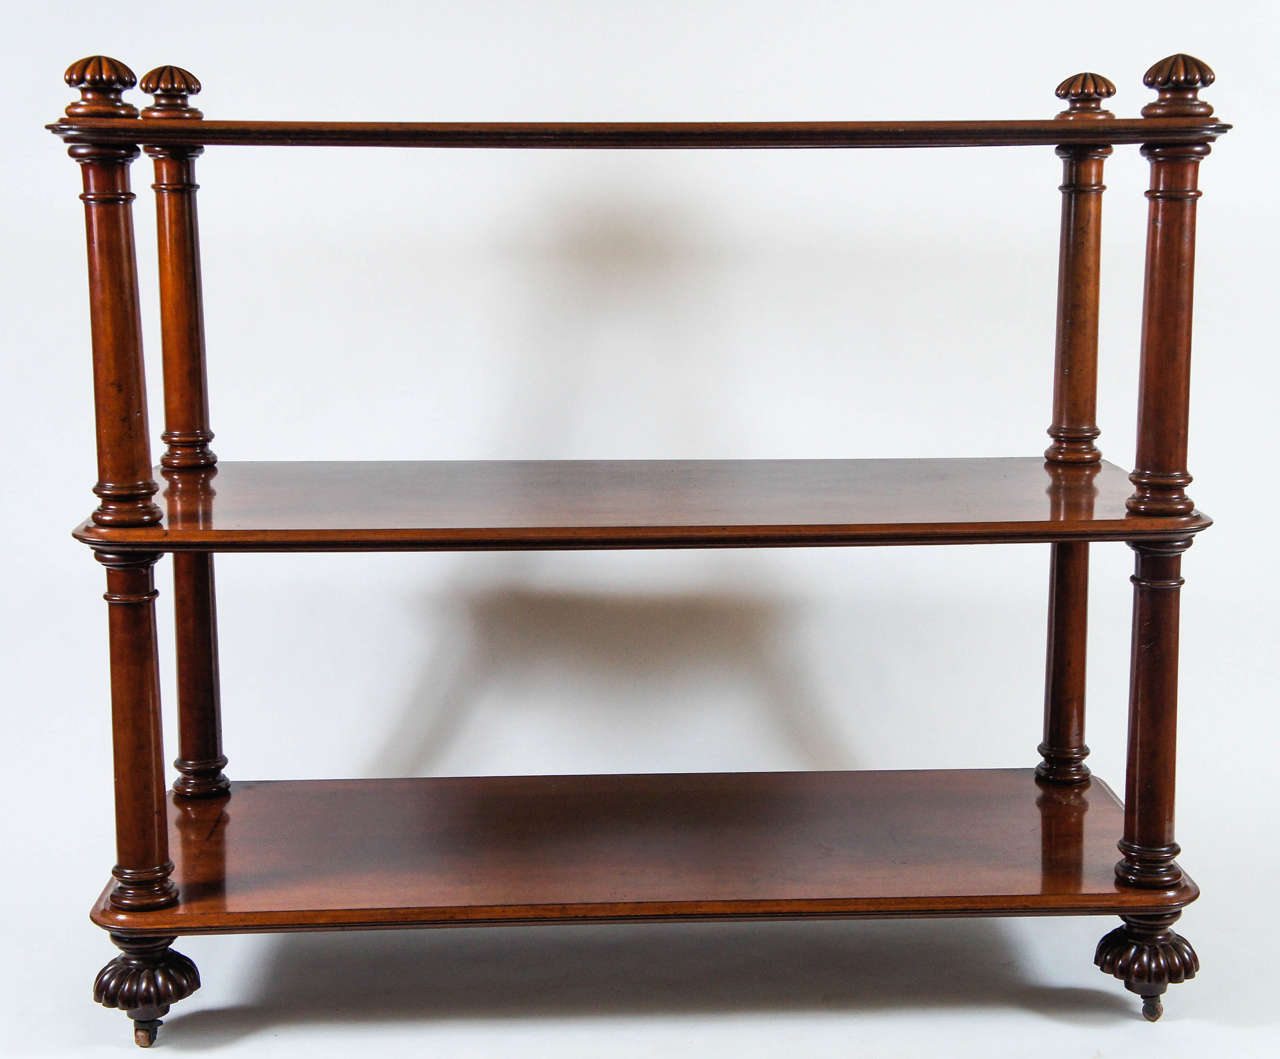 Exquisite English George IV period mahogany three-tier étagère form trolley server of large scale having gadroon relief carved knob form finials atop double Tuscan form colonette side supports on large dramatic gadroon relief-carved bottom